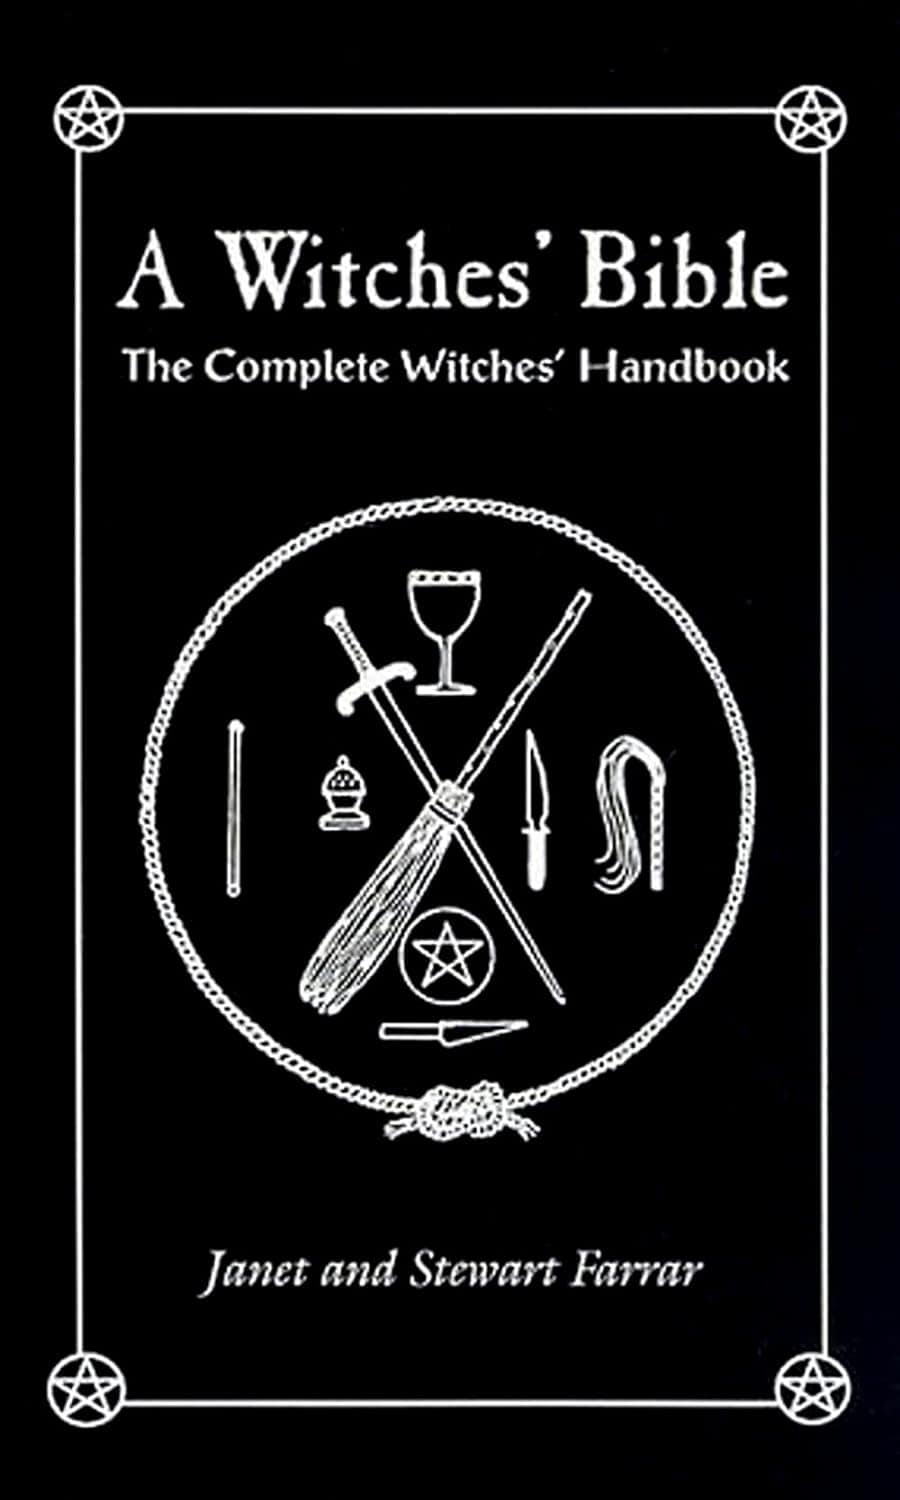 A Witches' Bible: The Complete Witches' Handbook by Stewart & Janet Farrar